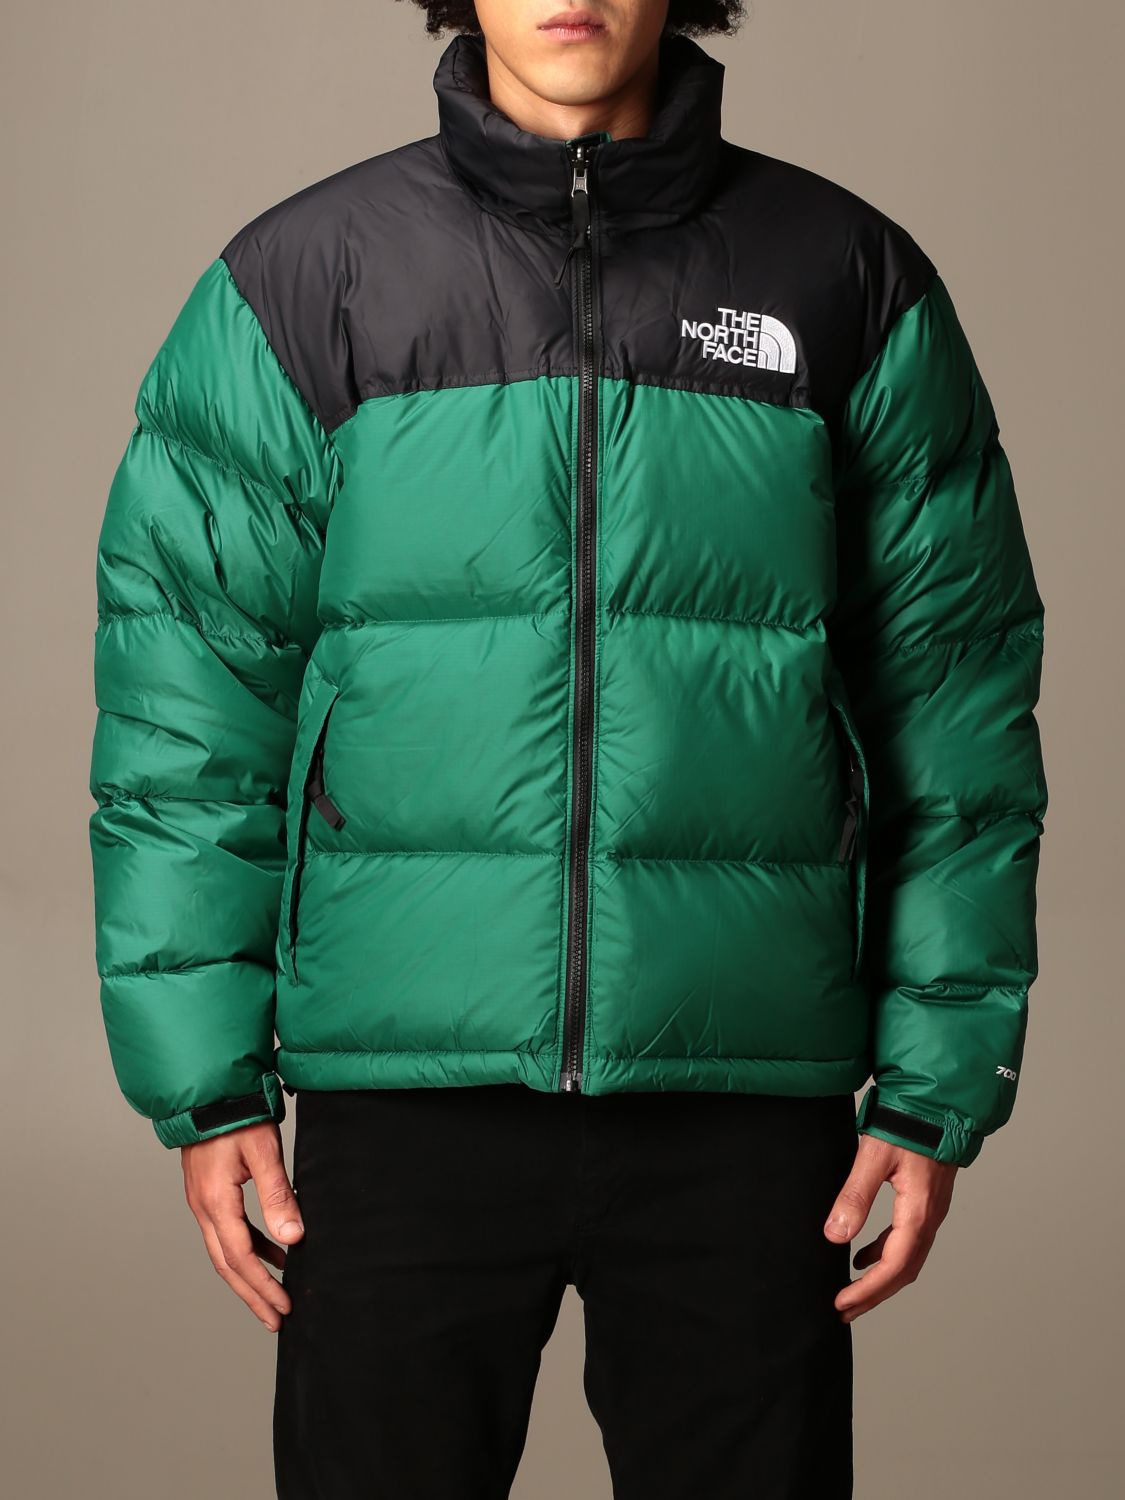 North face in jacket